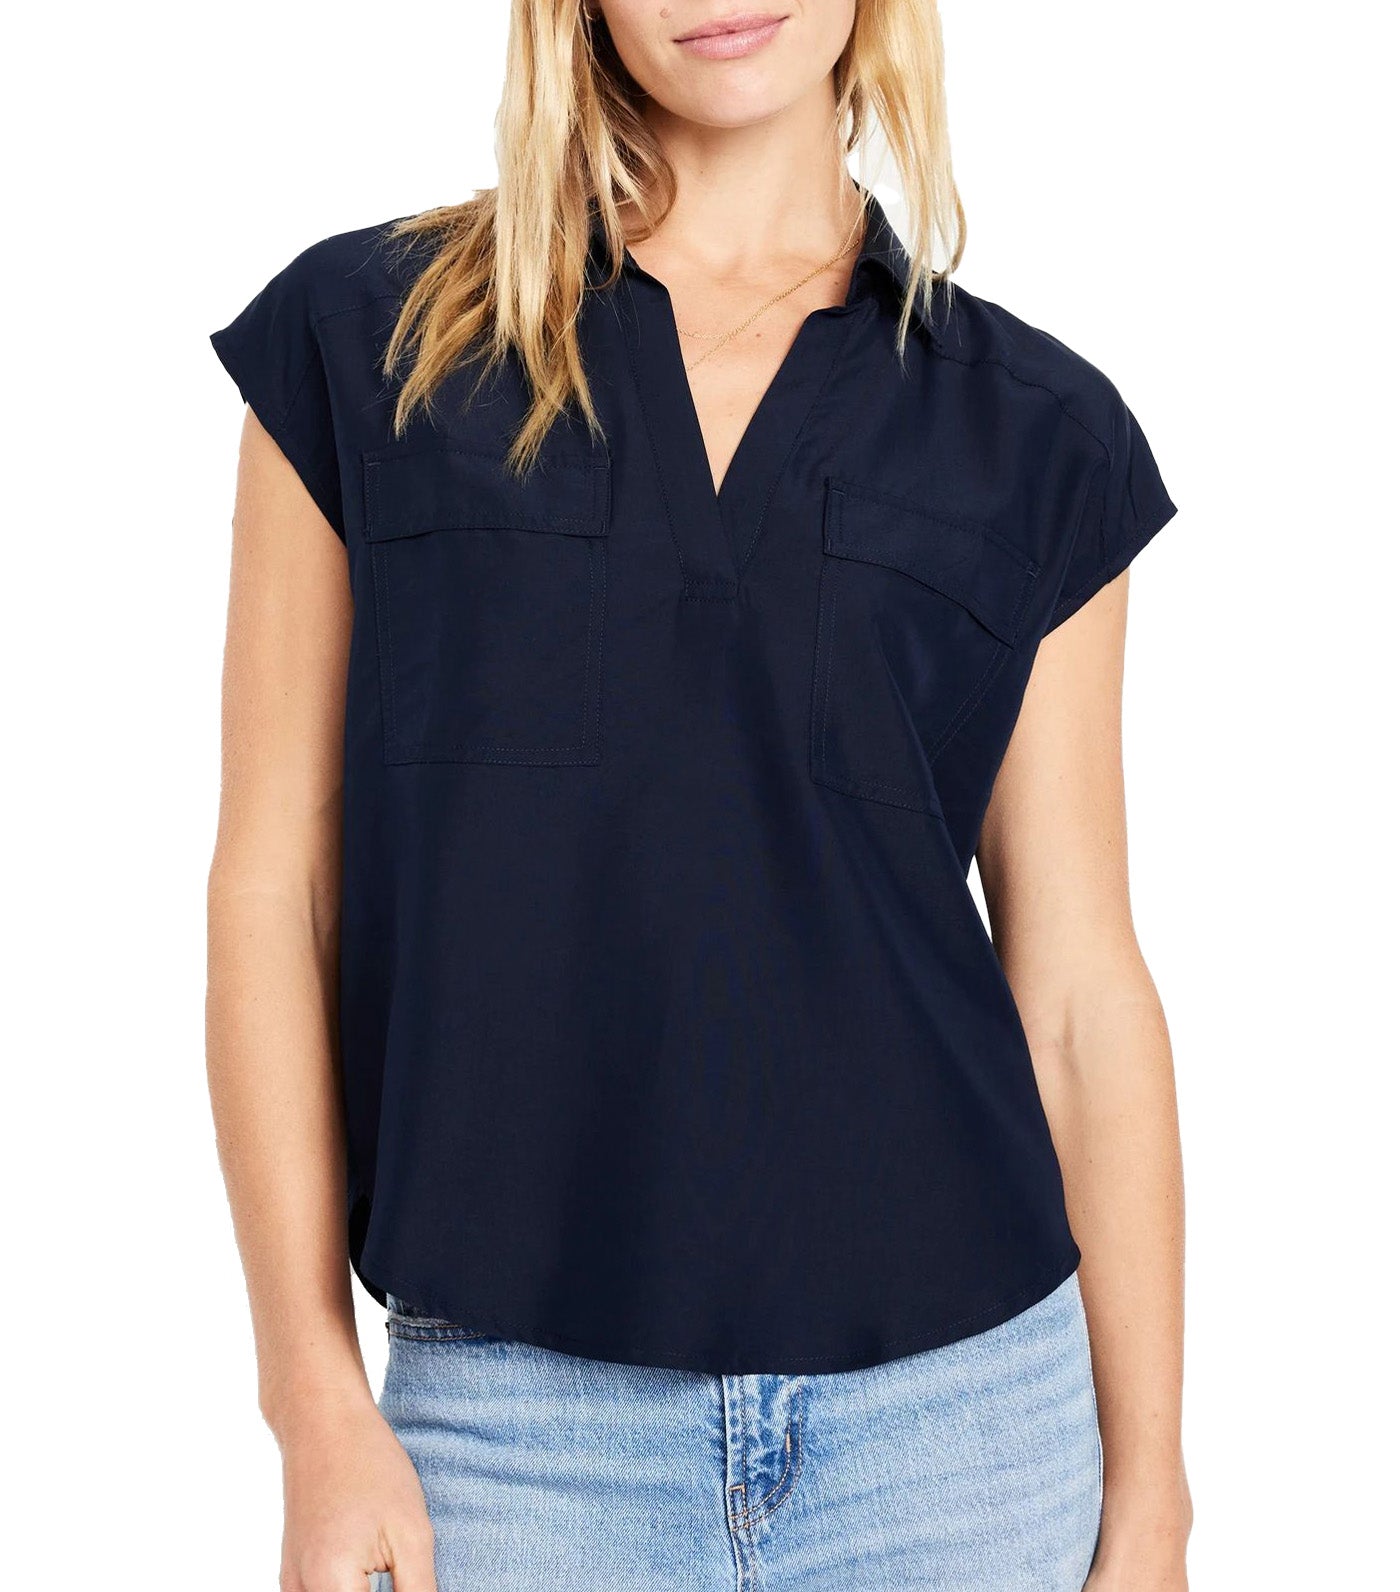 Dolman-Sleeve Utility Top for Women In The Navy